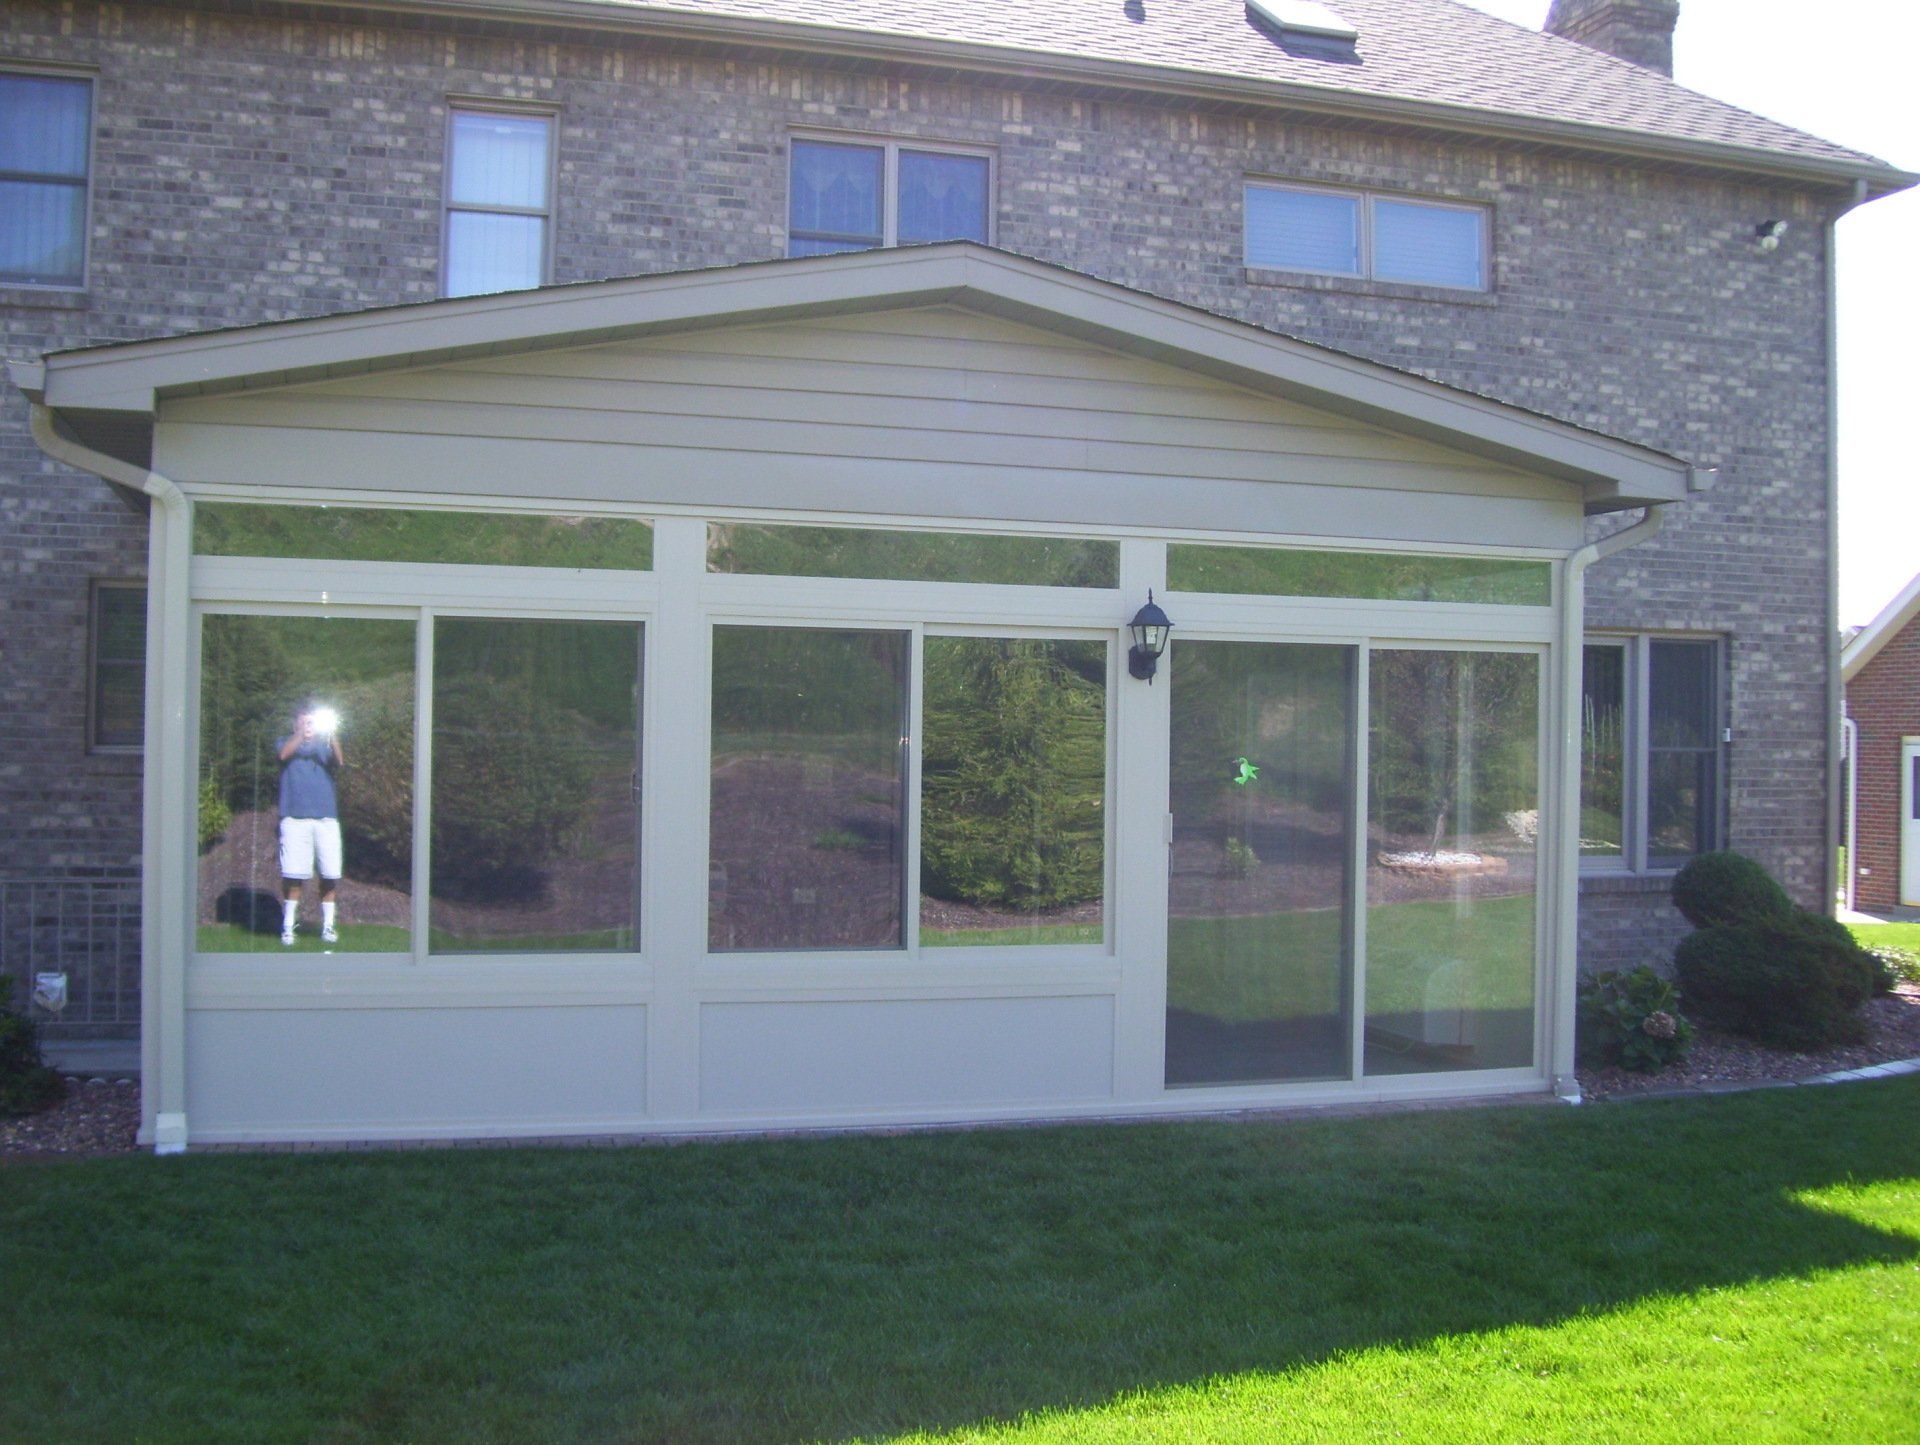 A man is standing in front of a screened in porch